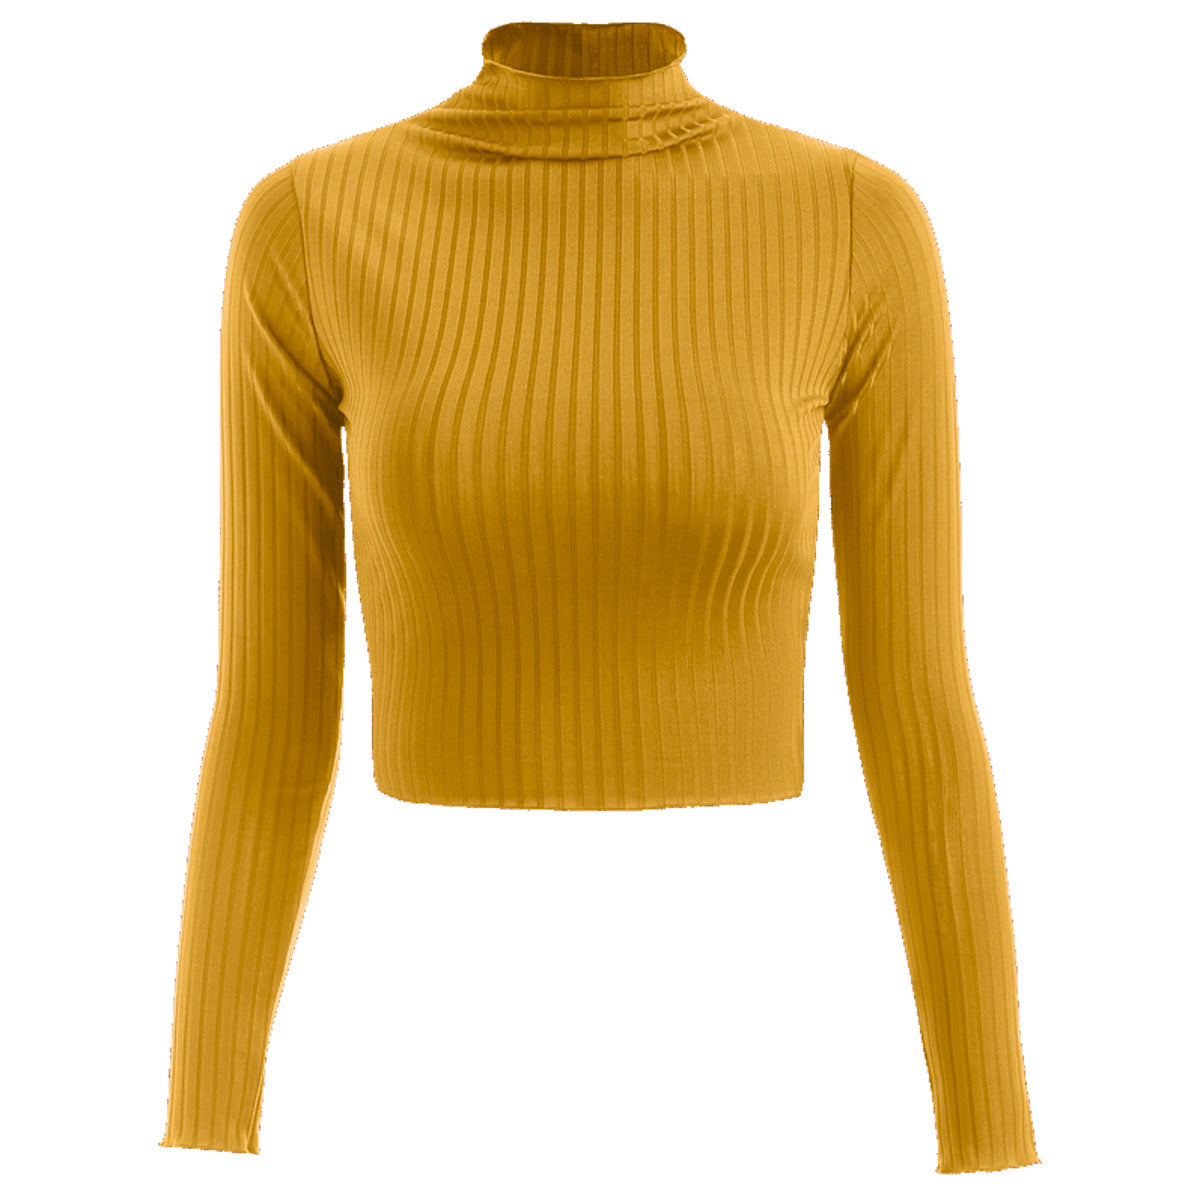 Women's Half Turtleneck Solid Color Long Sleeve Knitted Slim Fit Blouses